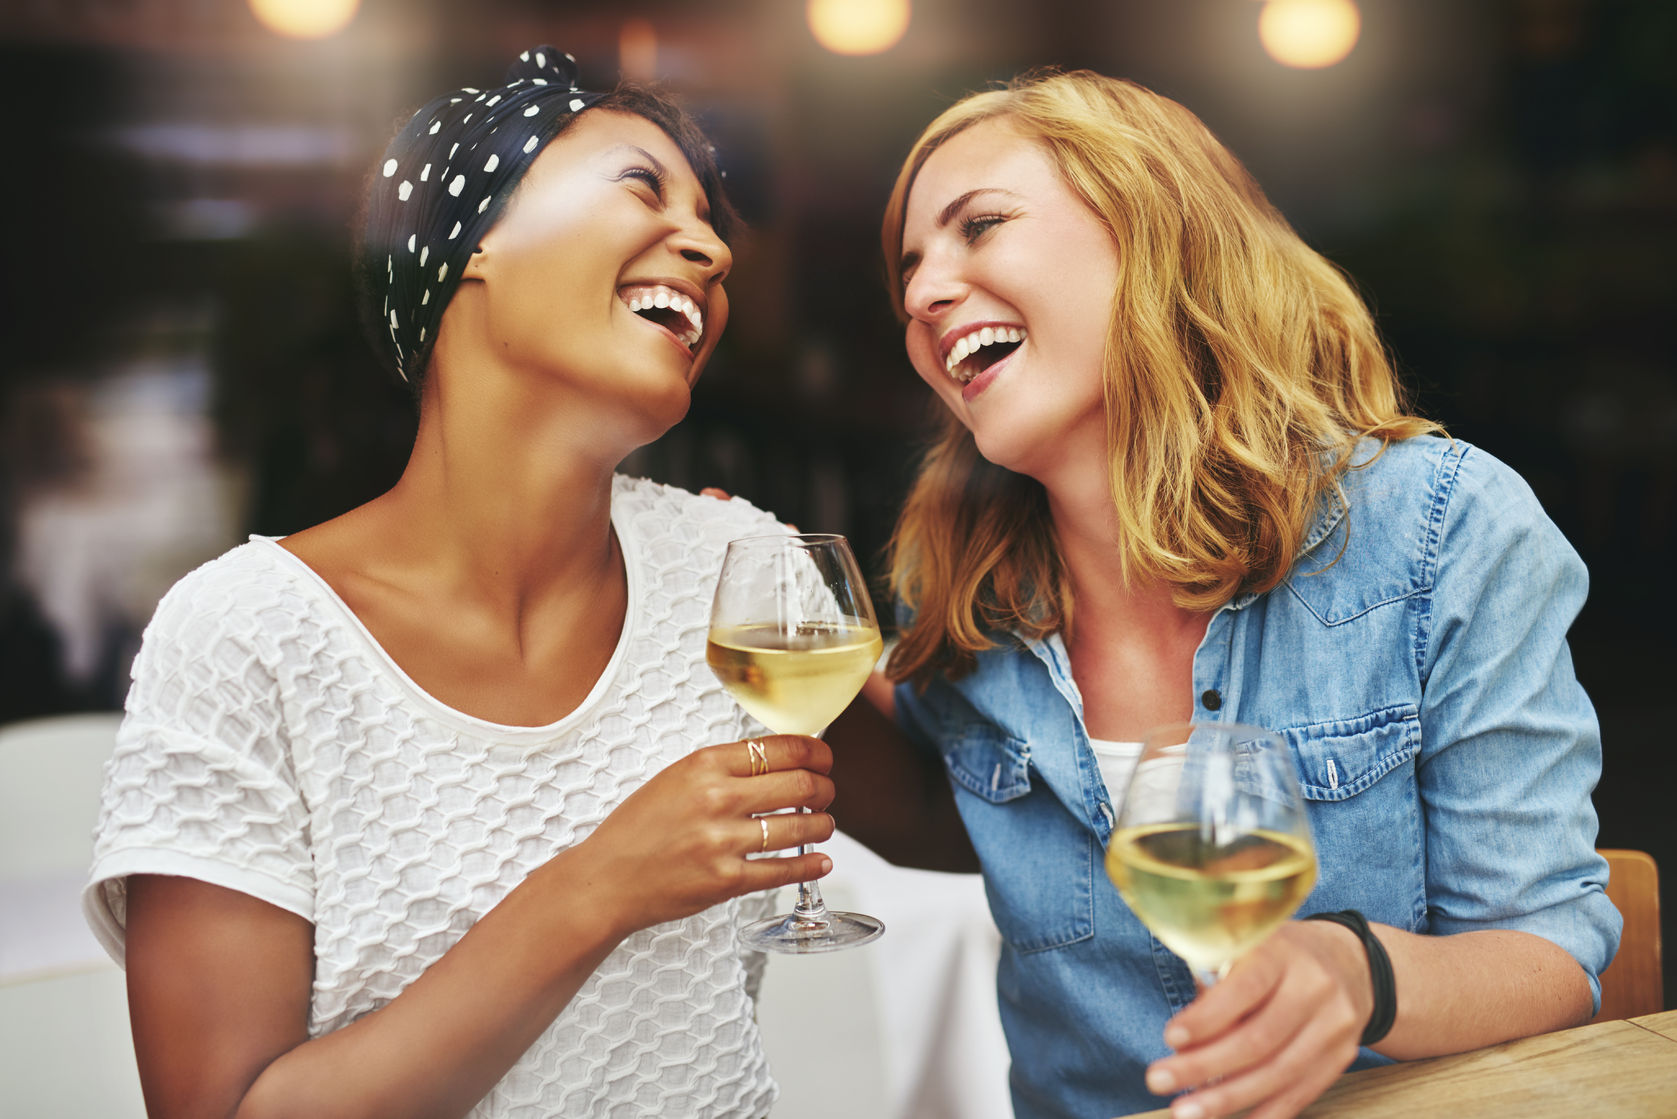 46626161 - two young attractive vivacious multiethnic female friends celebrating and laughing together over a glass of white wine